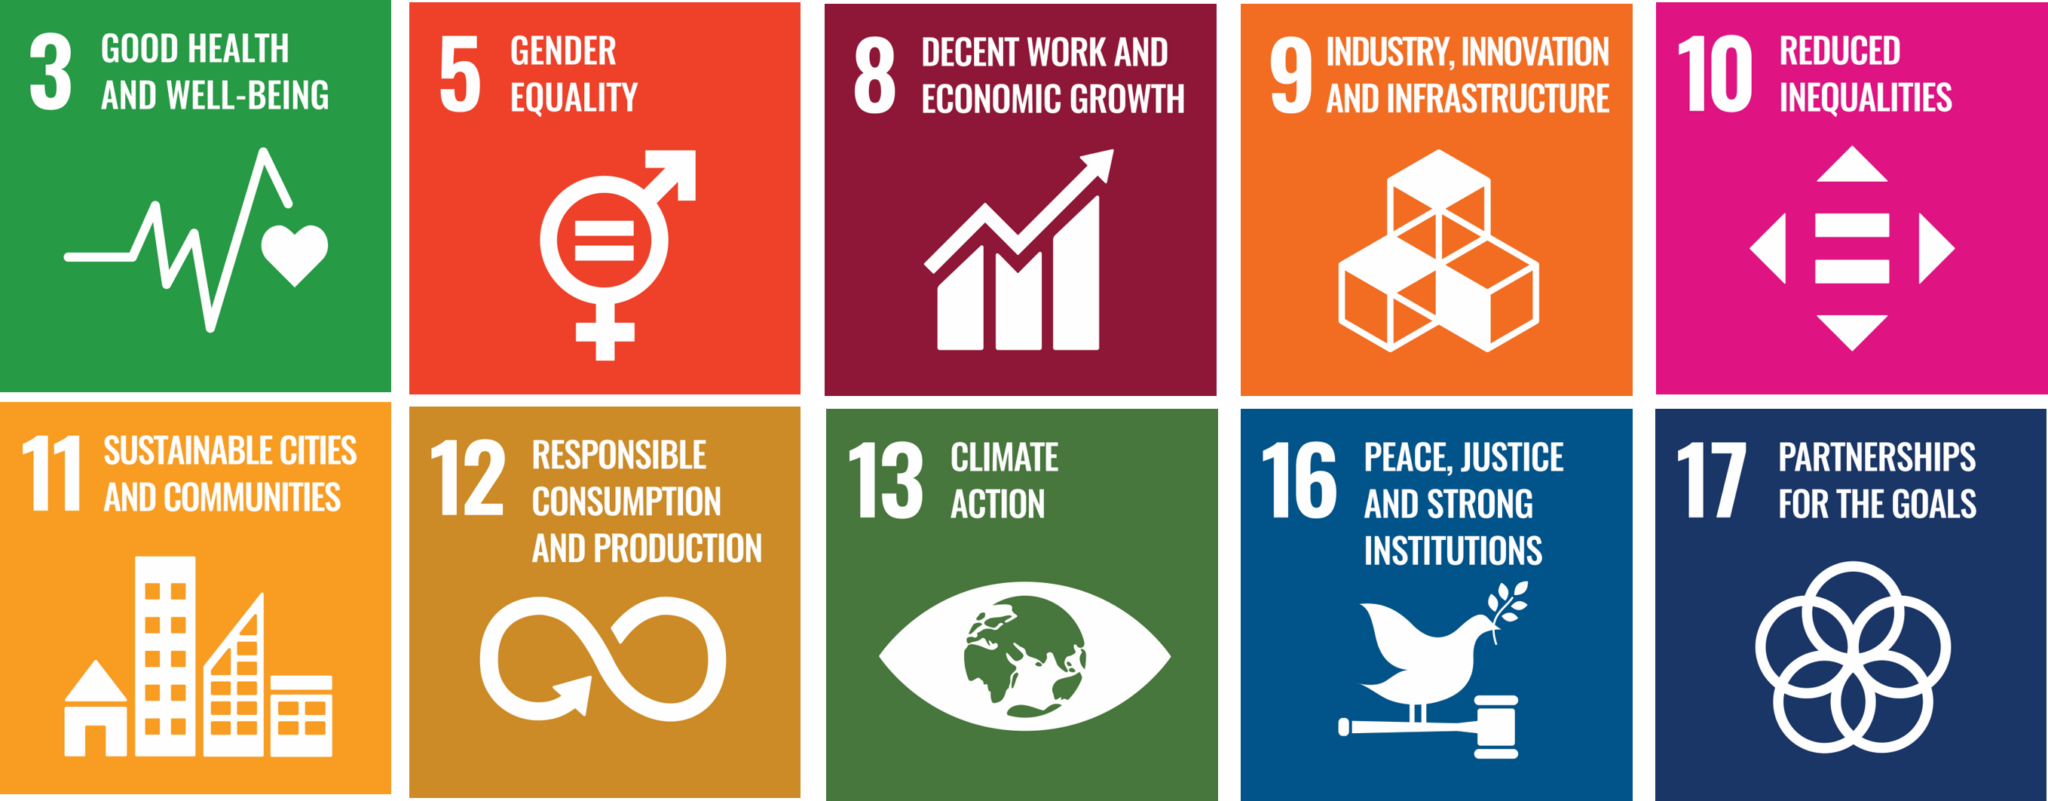 Our contribution to the United Nations Sustainable Development Goals 2022